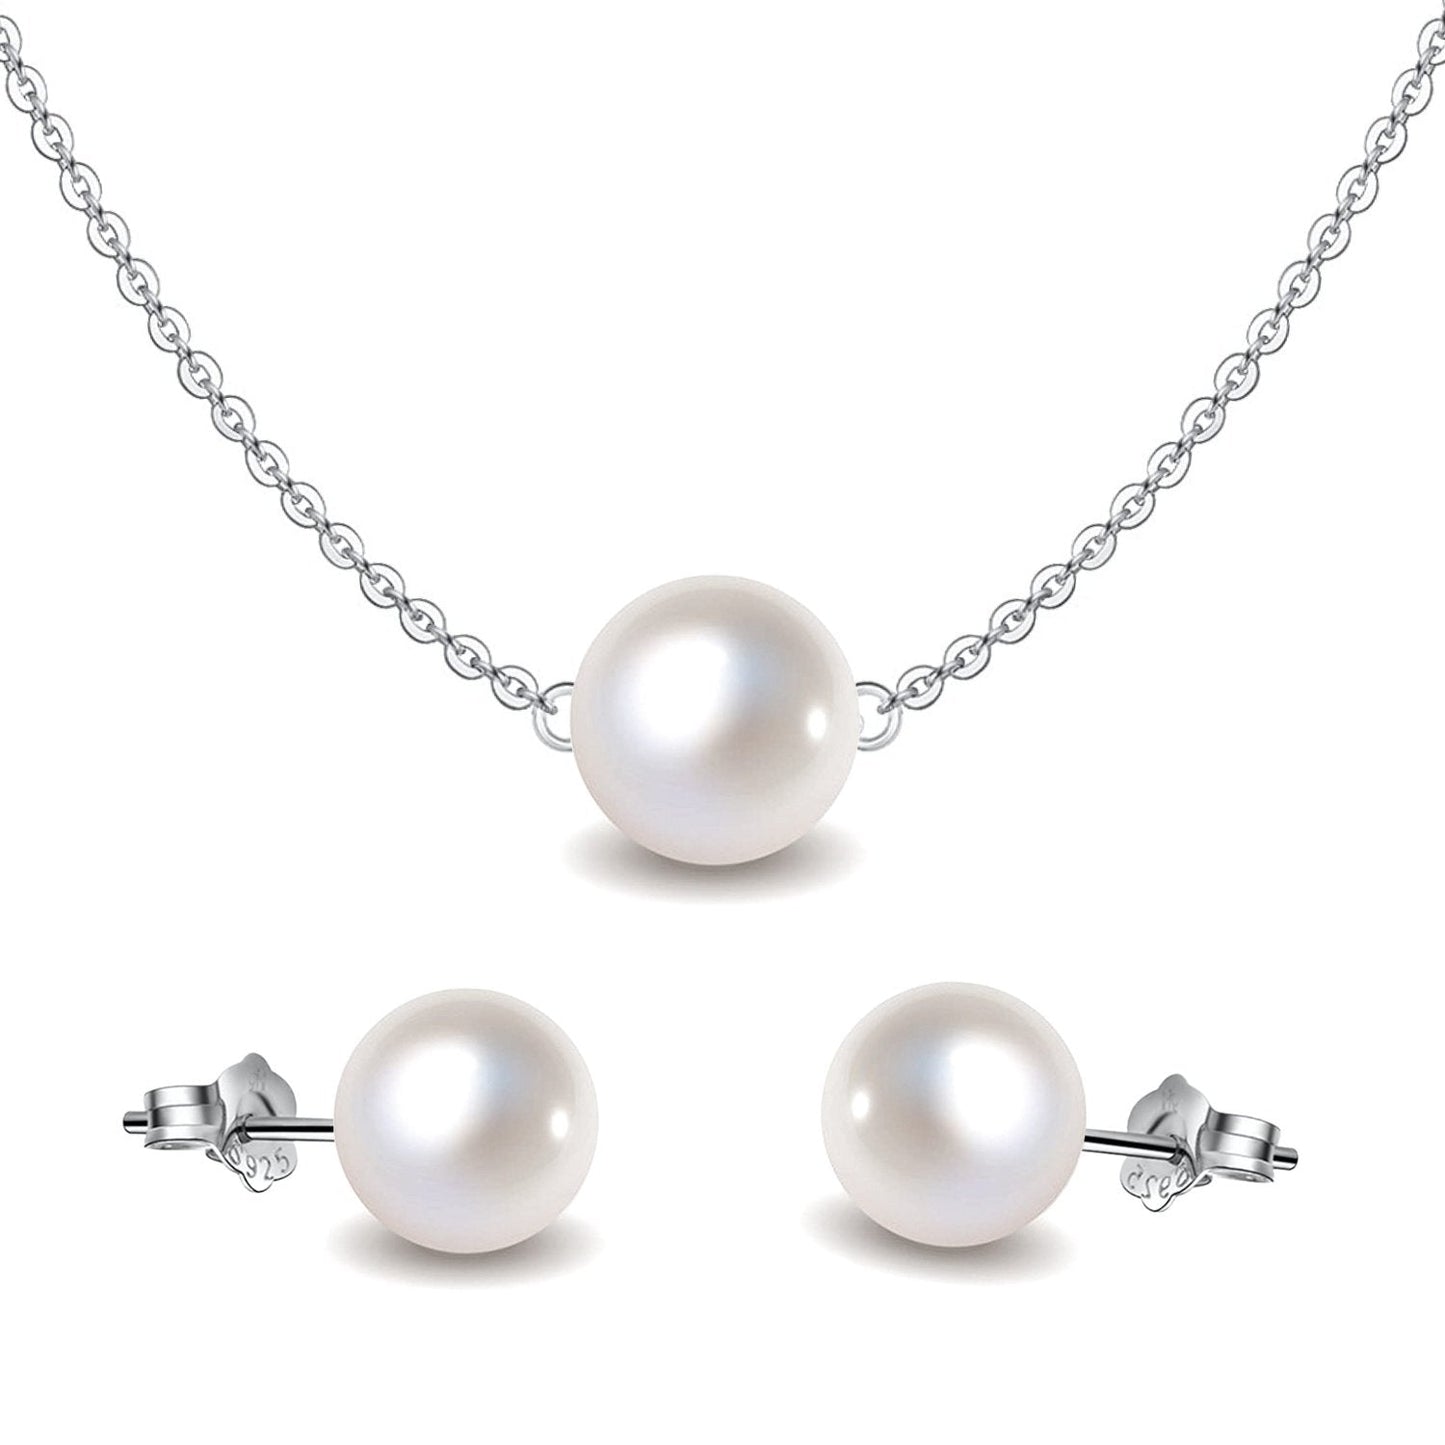 Pearl Moon Set - South Sea - Full Round Pearls - Earrings, Necklace & Chain Set